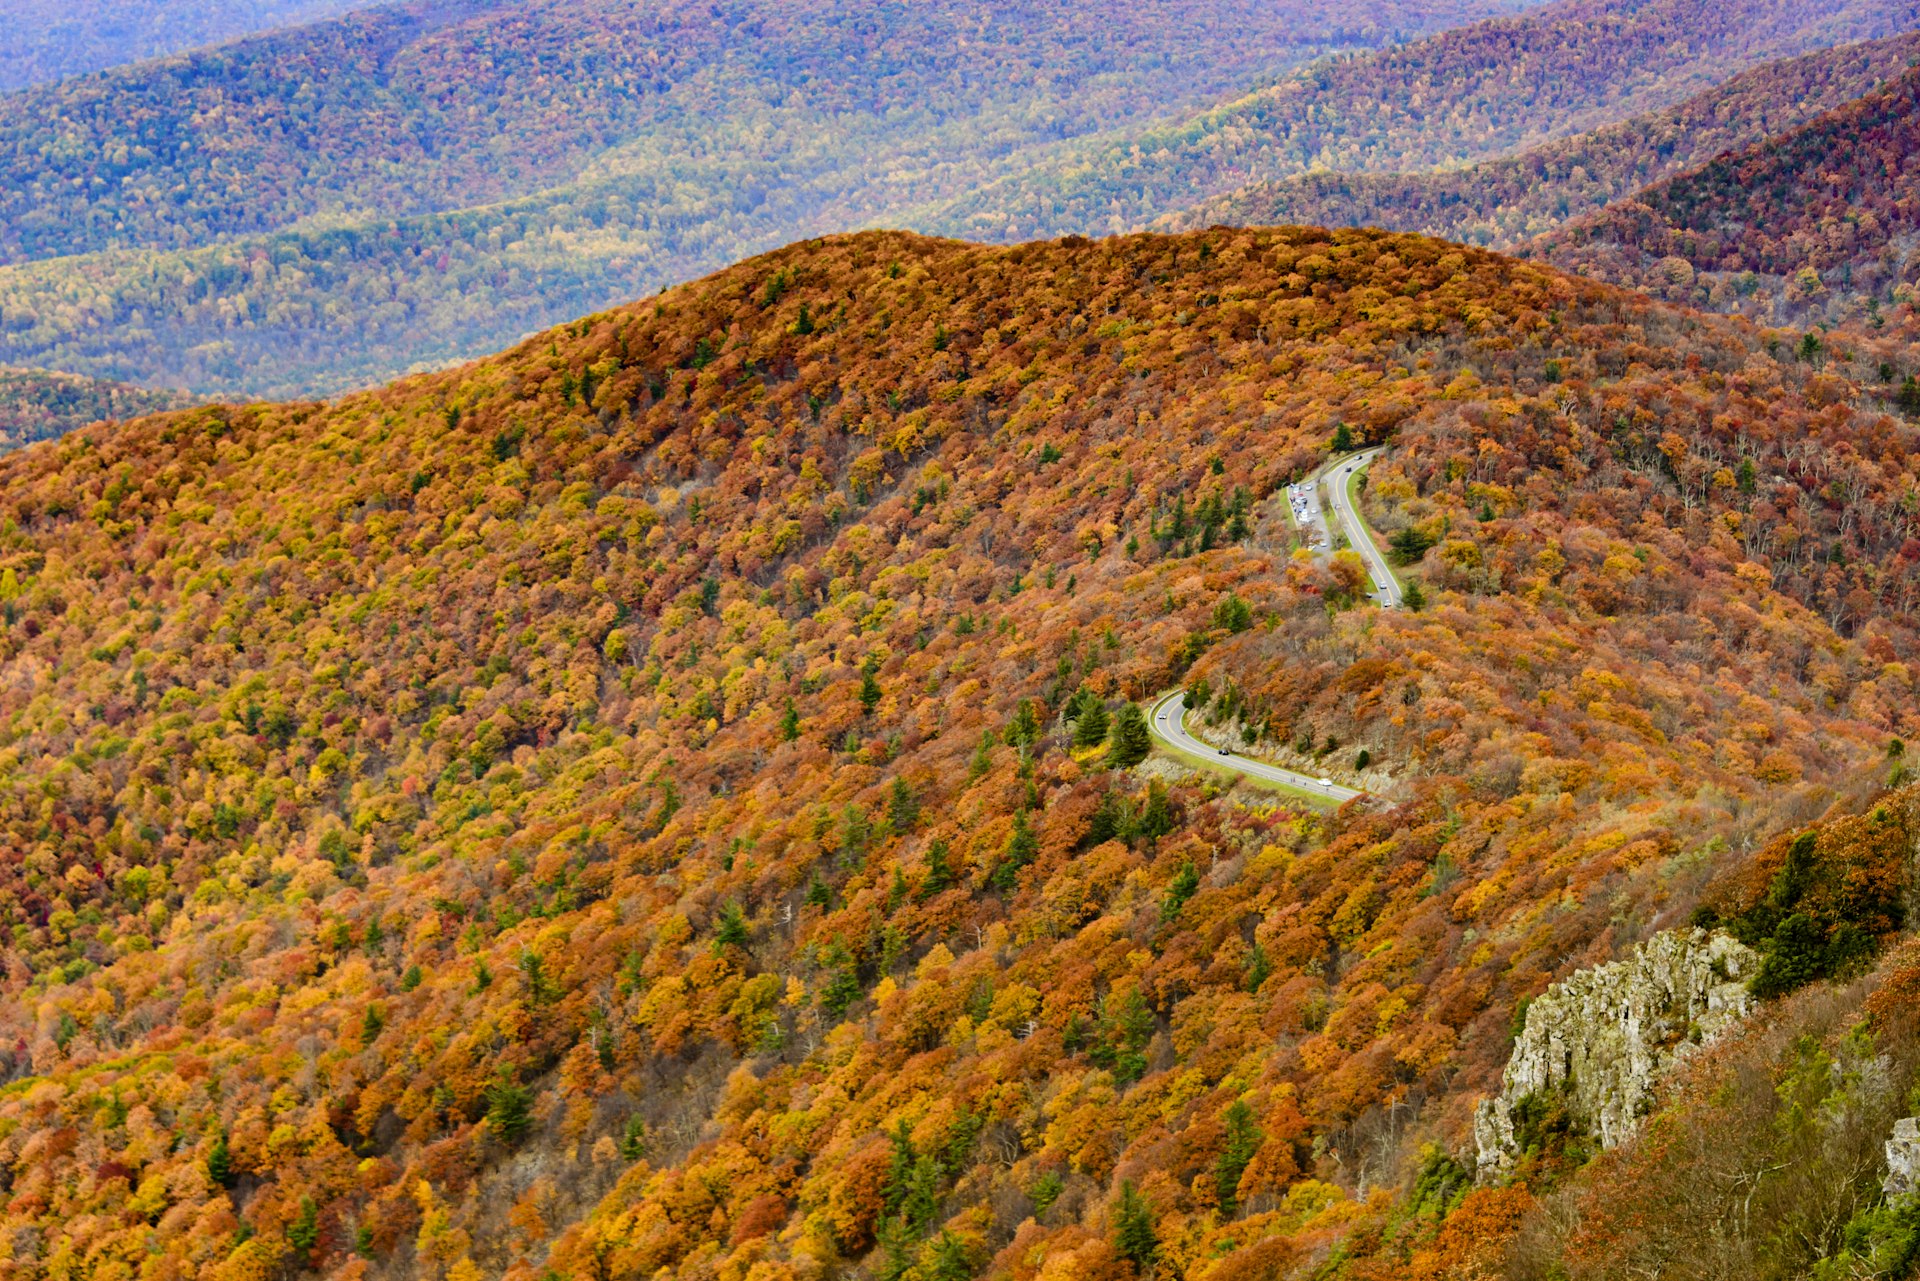 Skyline drive through the colorful autumn forest of Shenandoah National Park, Virginia